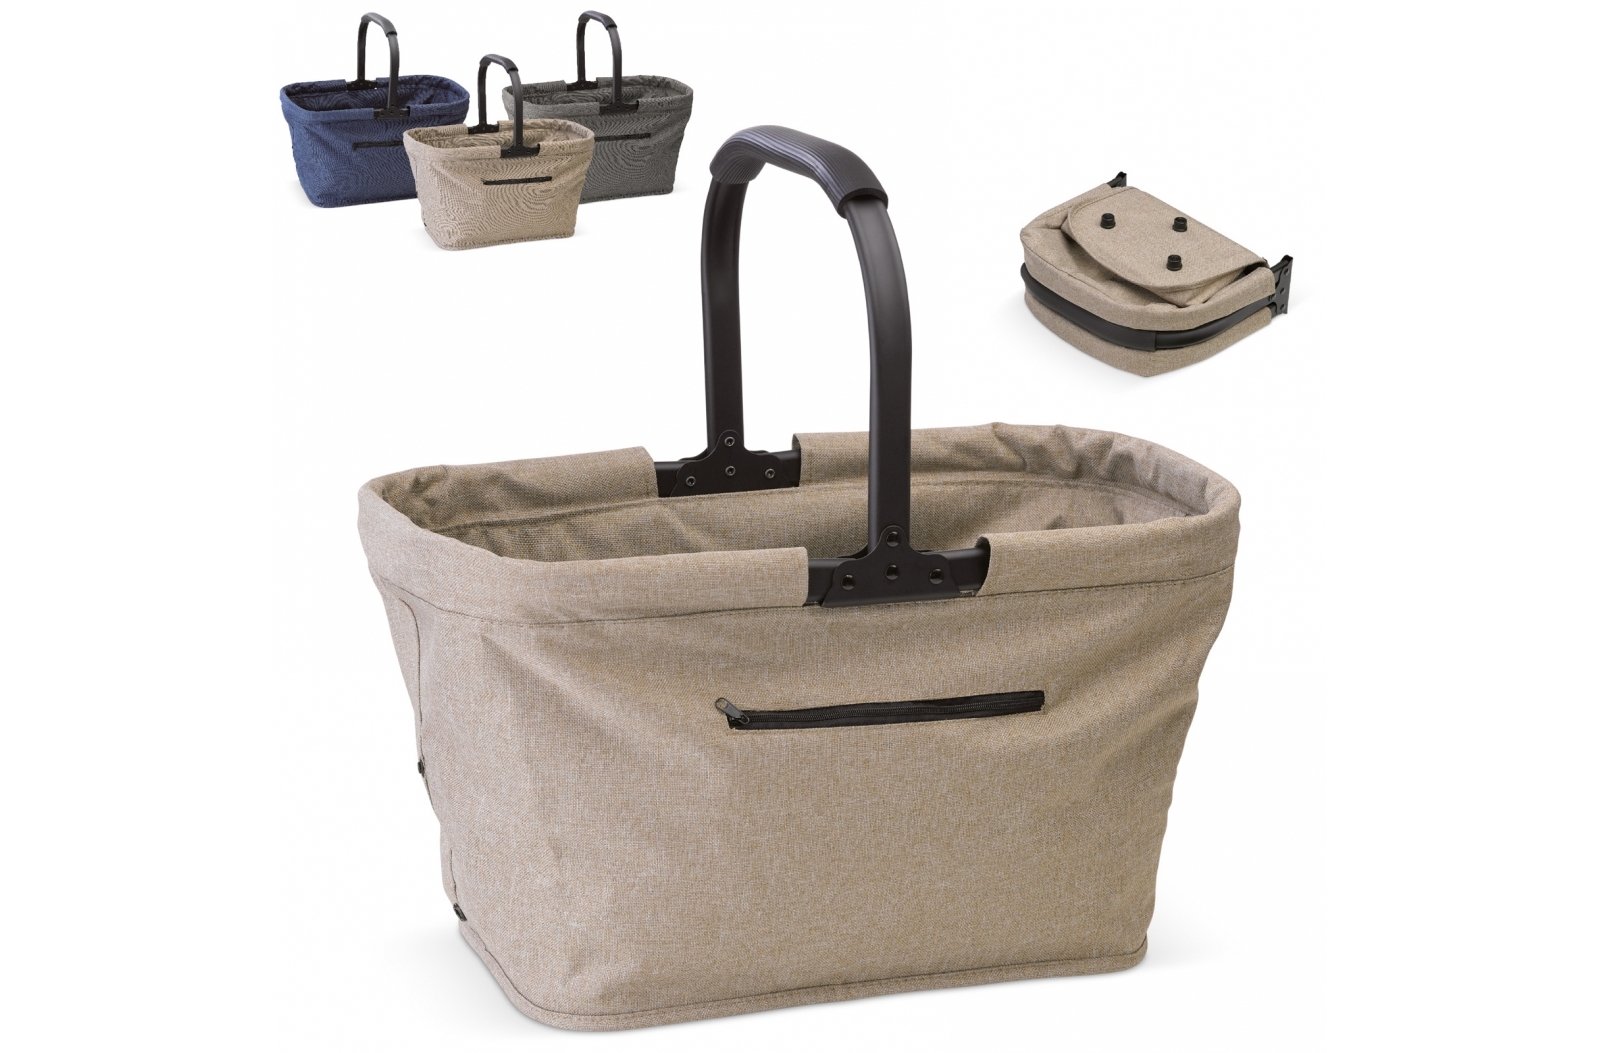 A shopping basket made from high-quality 600D polyester that can be easily folded for convenience - Slough